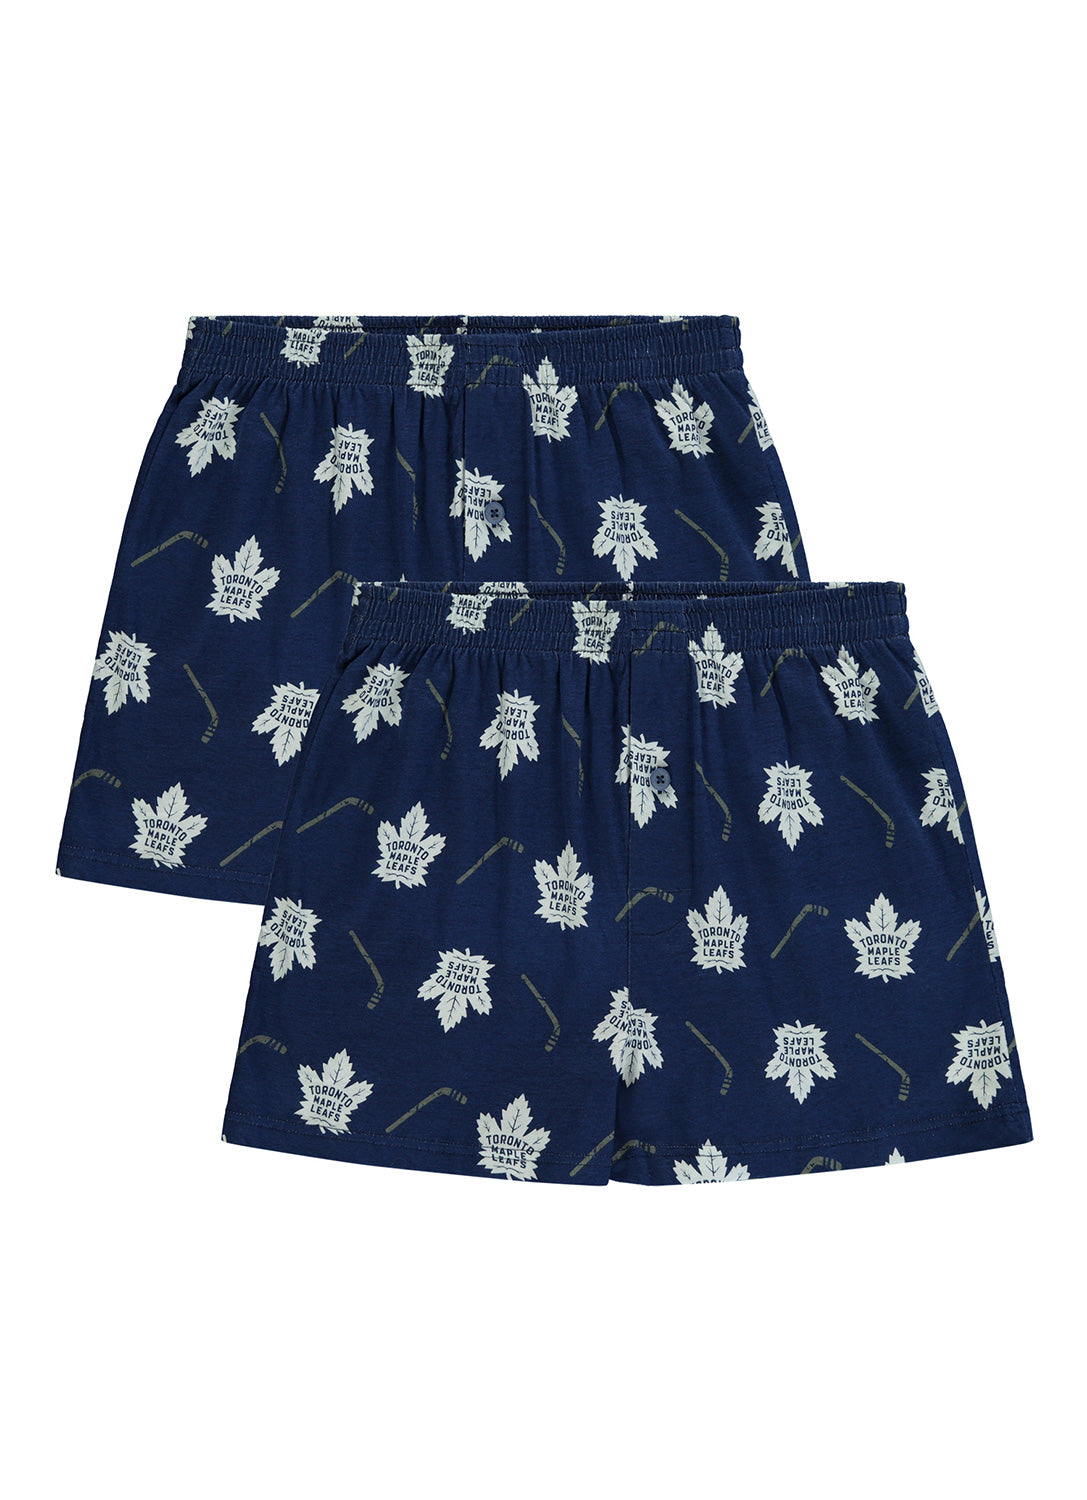 Pair of mens boxers with Toronto Maple Leafs print (navy)